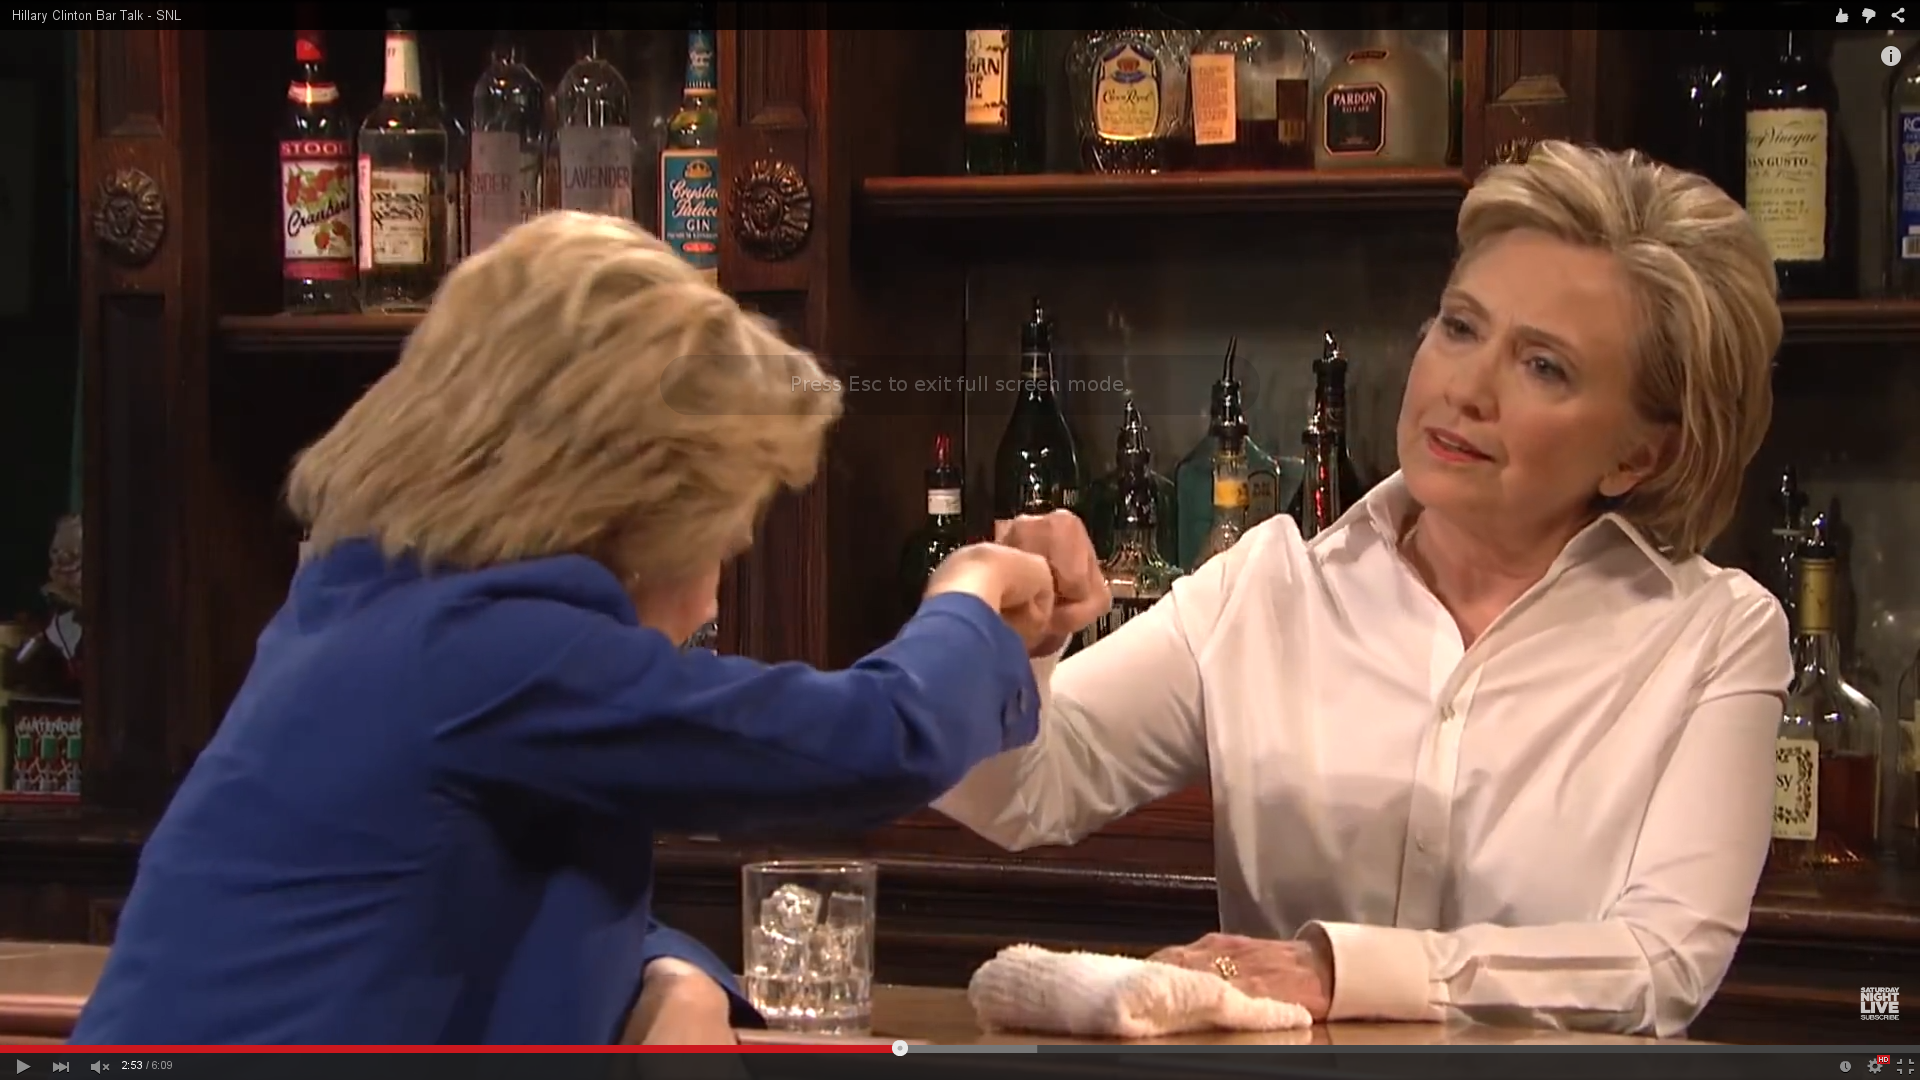 "Val" fist bumps with Hillary Clinton